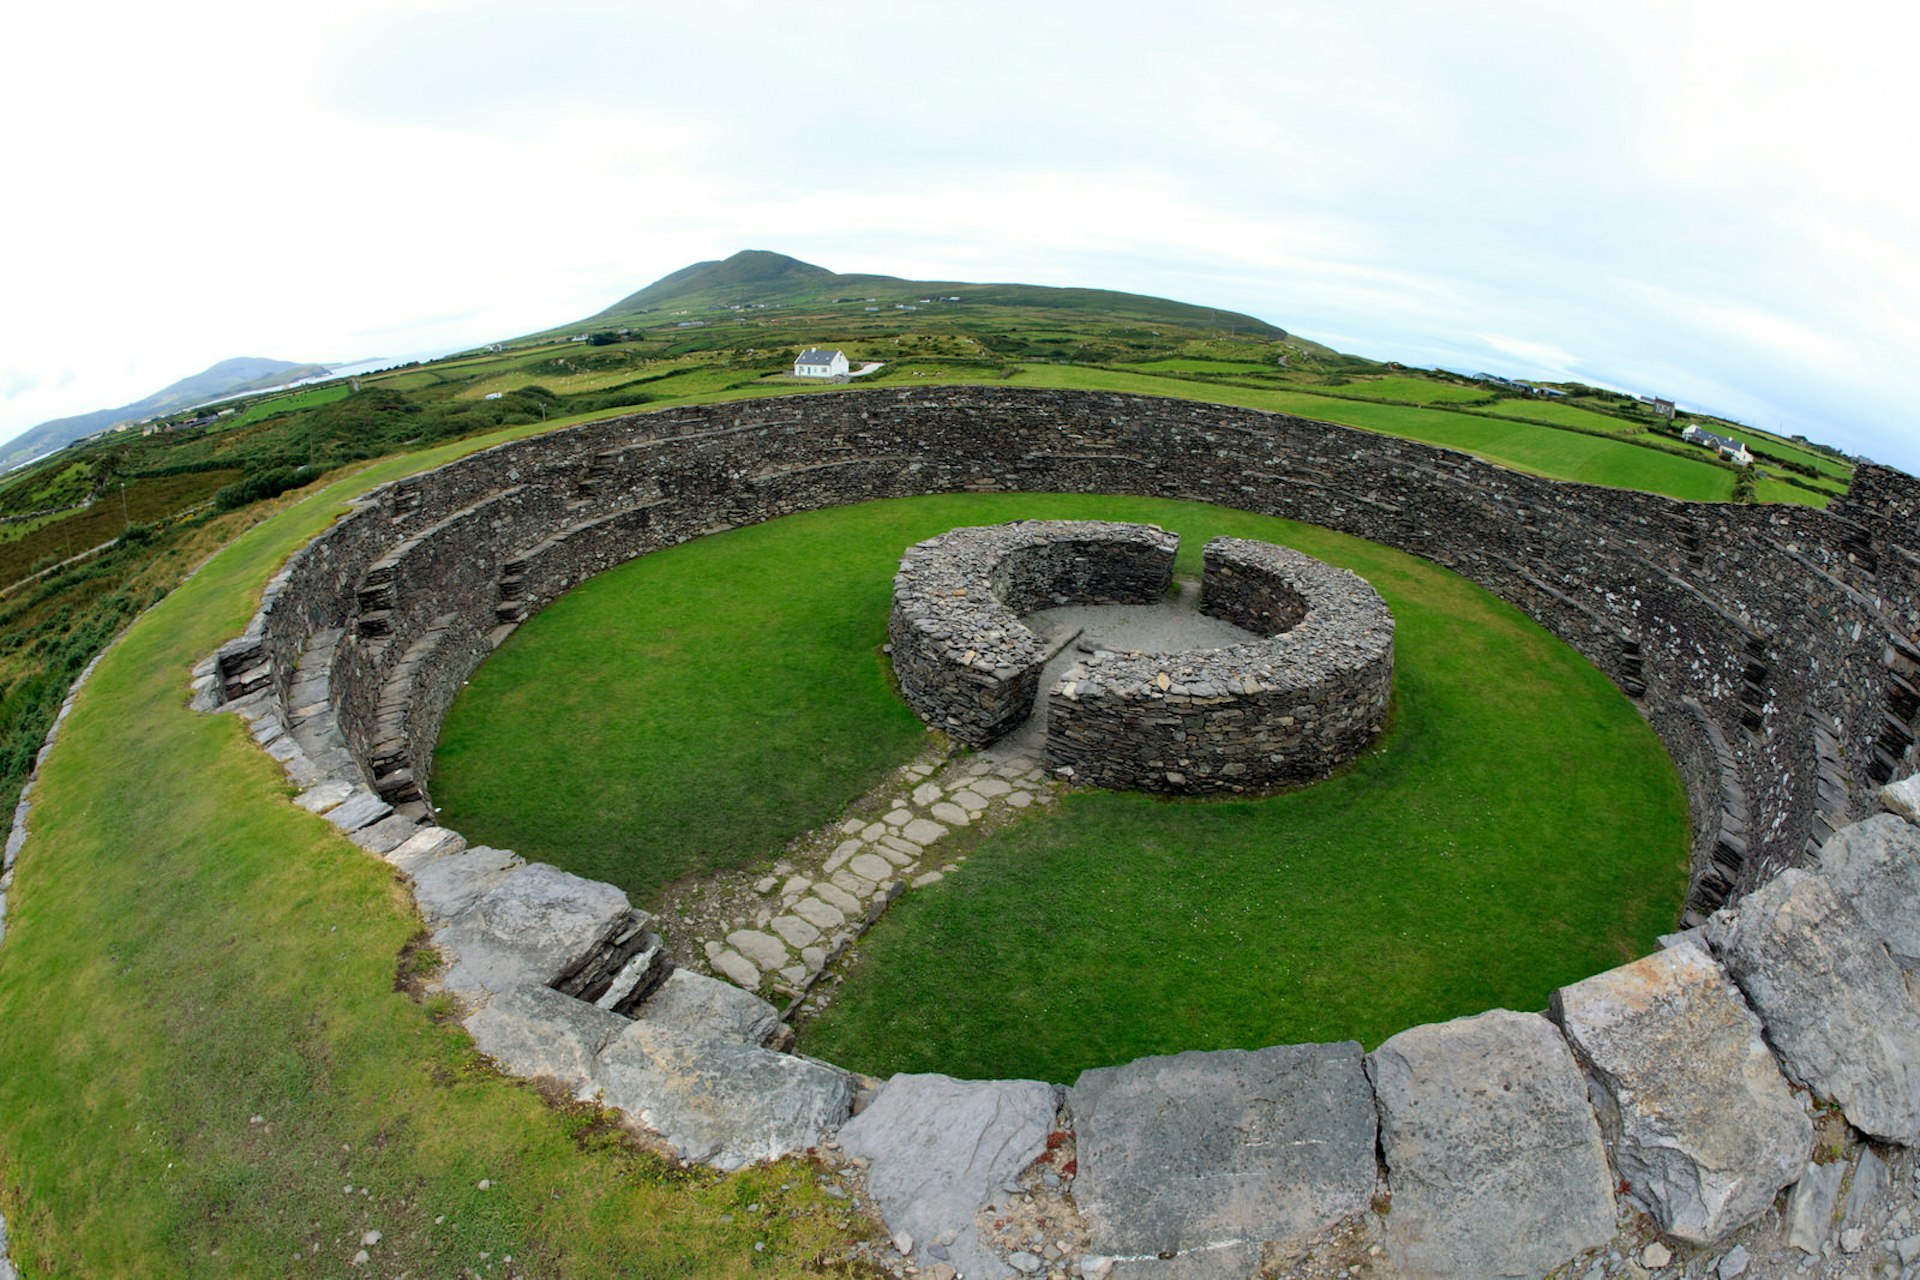 An ancient stone circle on grassy landscape surrounds a smaller stone circular fort.